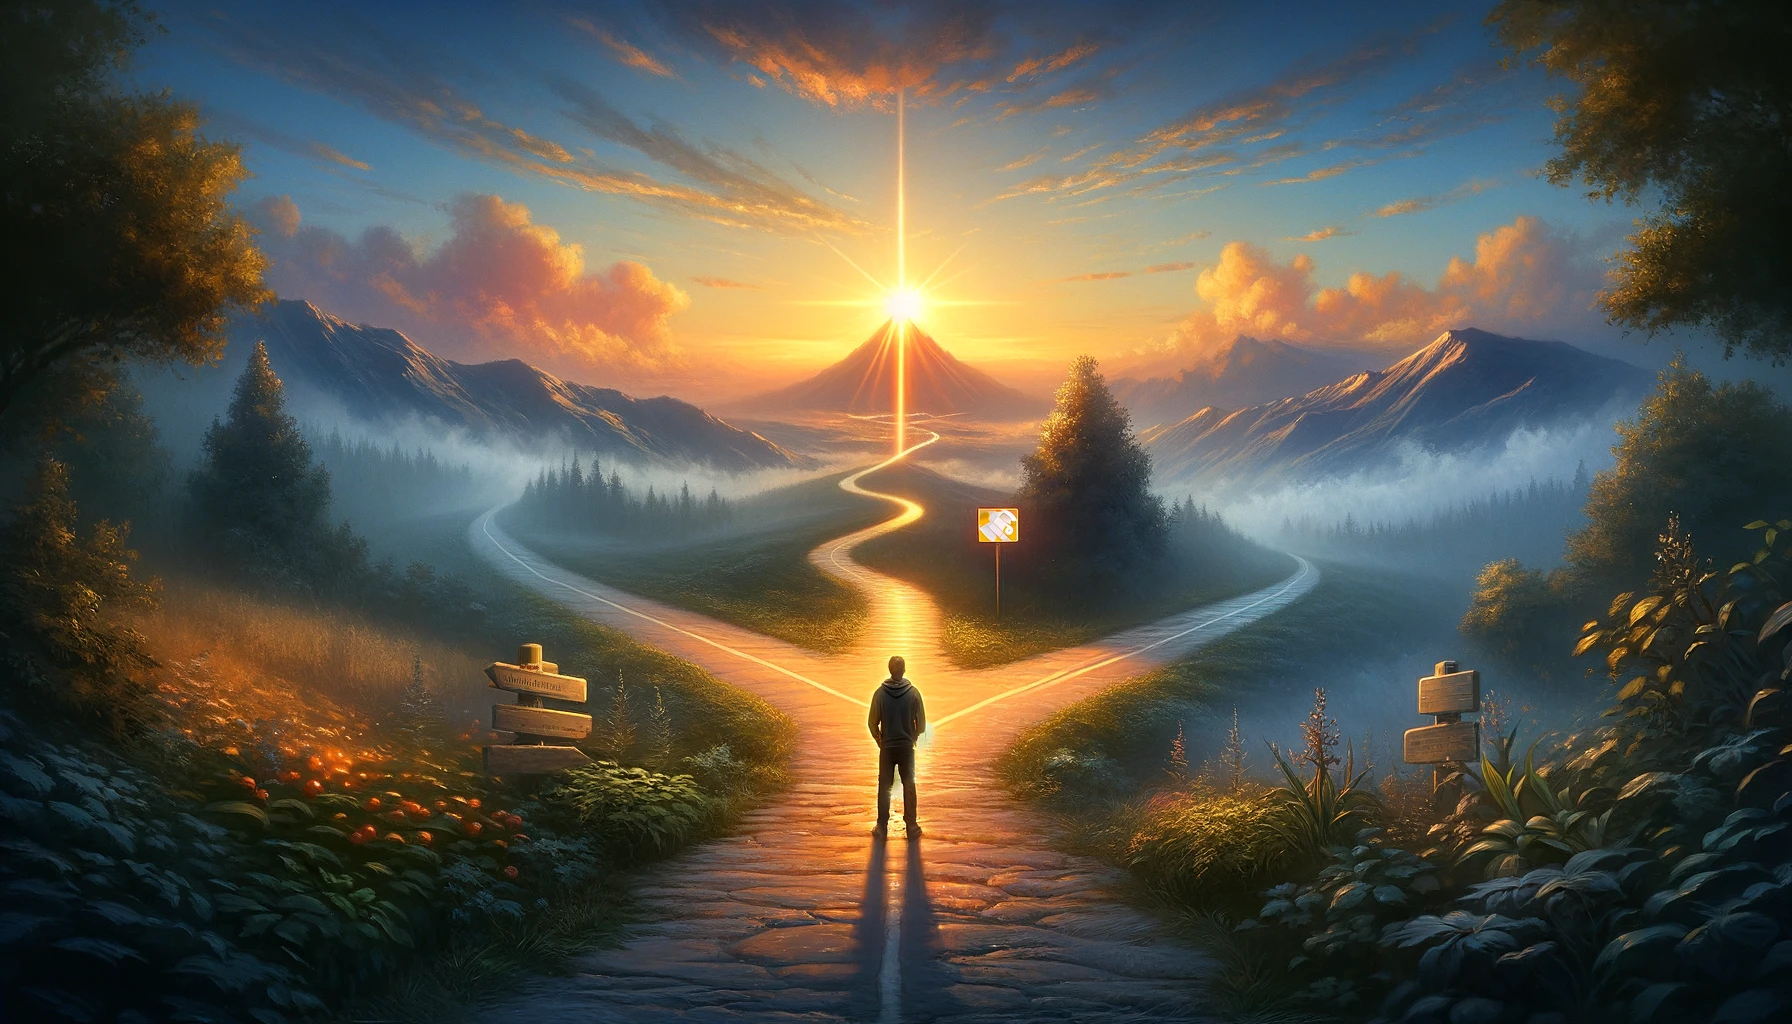 A person pausing at a crossroads, with one path leading straight ahead and another veering towards a luminous orange sign, symbolizing the awakening to the unnoticed aspects of our surroundings and the decision to observe more closely.